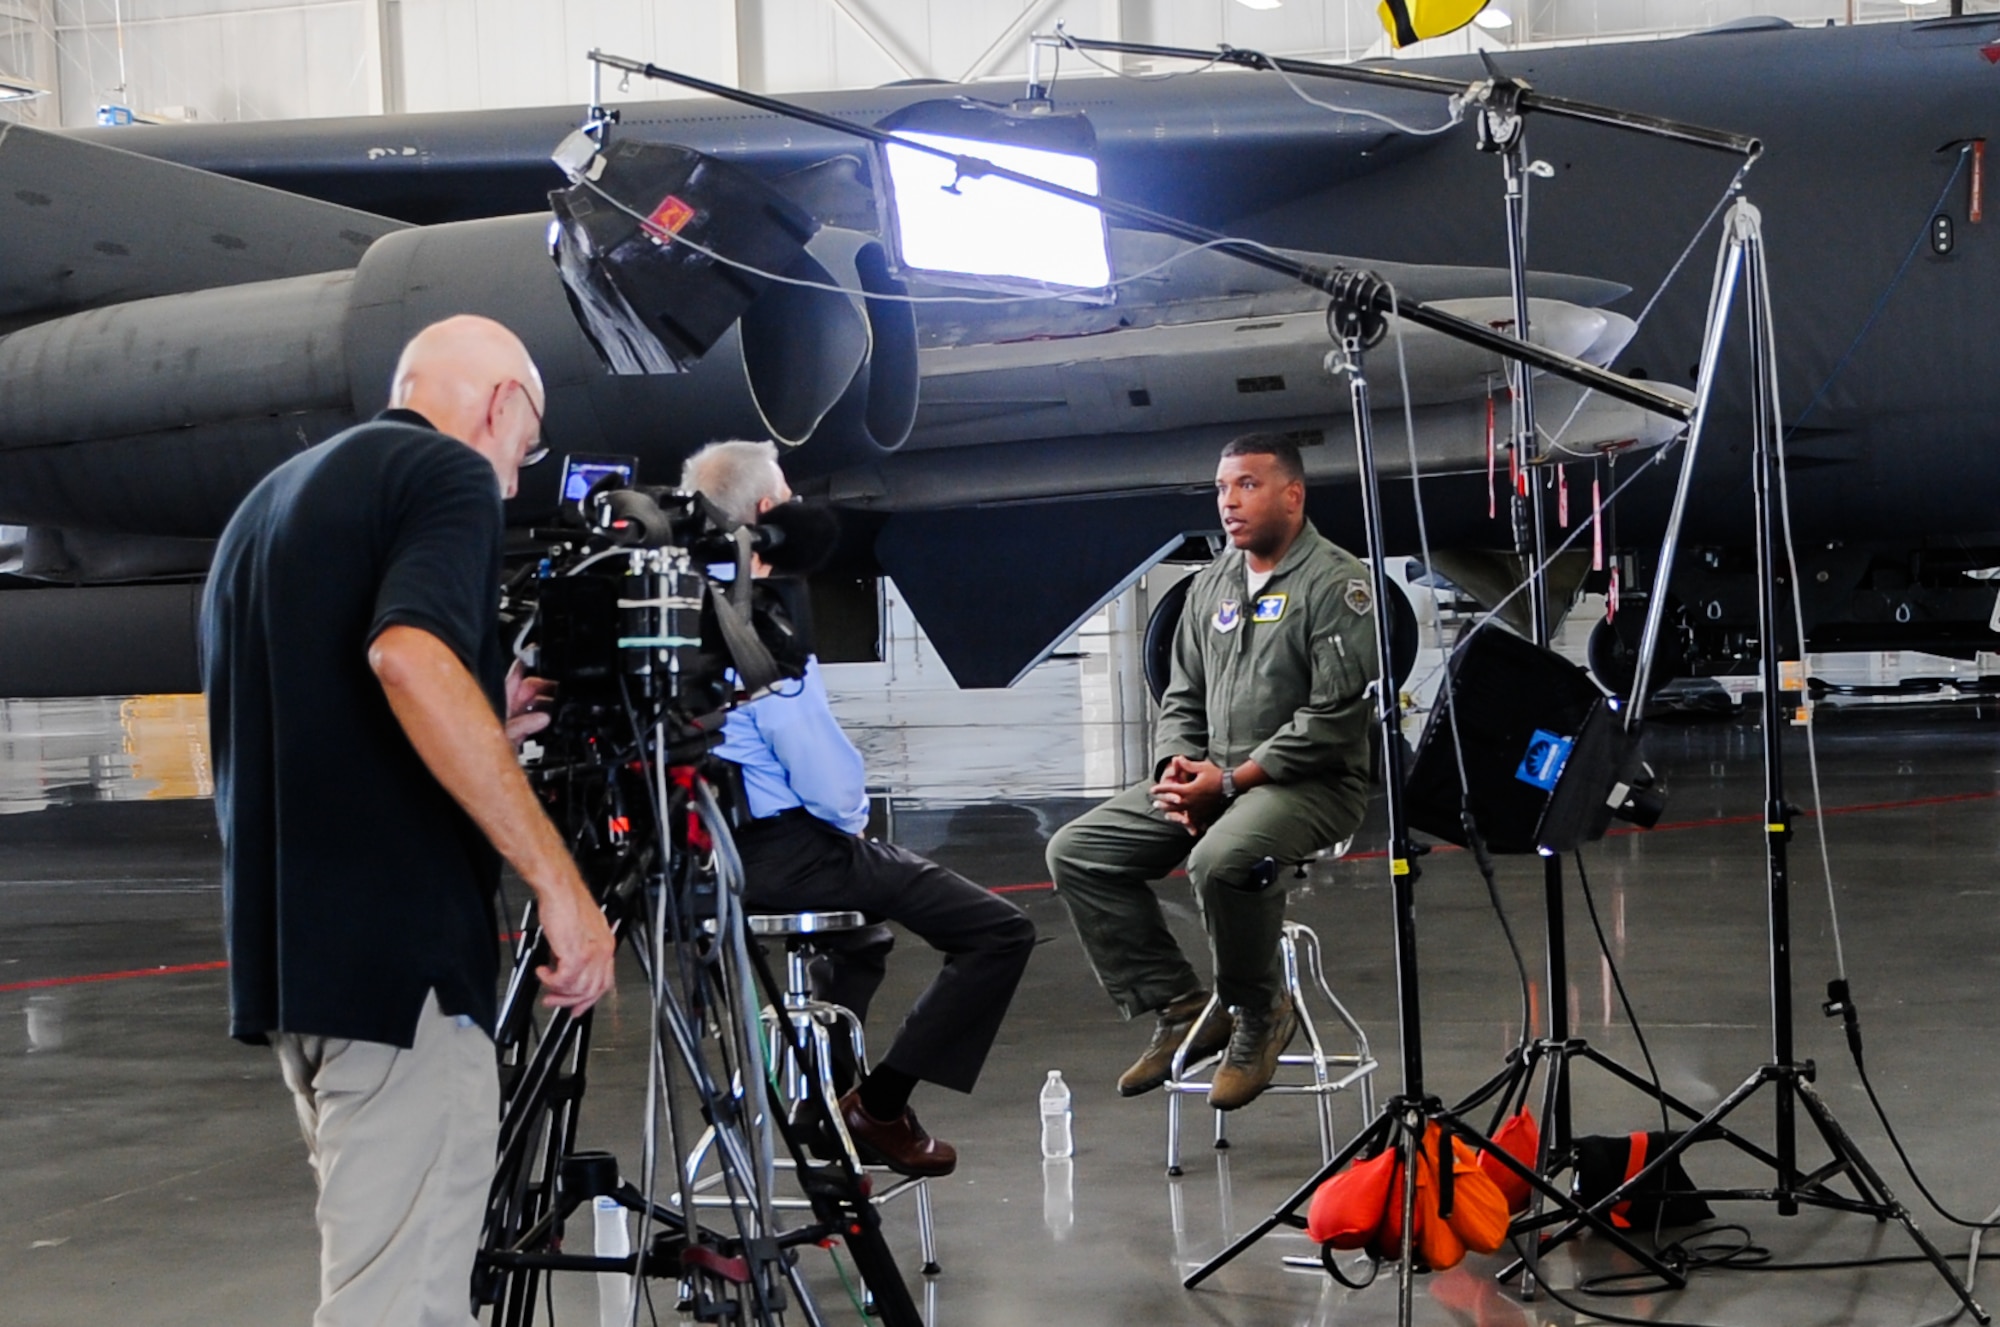 U.S. Air Force Maj. Gen. Richard M. Clark, Eighth Air Force commander, discusses how nuclear-capable bombers support the U.S. nuclear enterprise during an interview with CBS 60 Minutes at Barksdale Air Force Base, La., Sept. 8, 2016. Nuclear-capable bombers, such as the B-52 Stratofortress (pictured above) and B-2 Spirit, are the most flexible and visible leg of the nuclear triad. The CBS segment, which focuses on the entire nuclear enterprise is scheduled to air in the fall. (U.S. Air Force photo by A1C Stuart Bright)